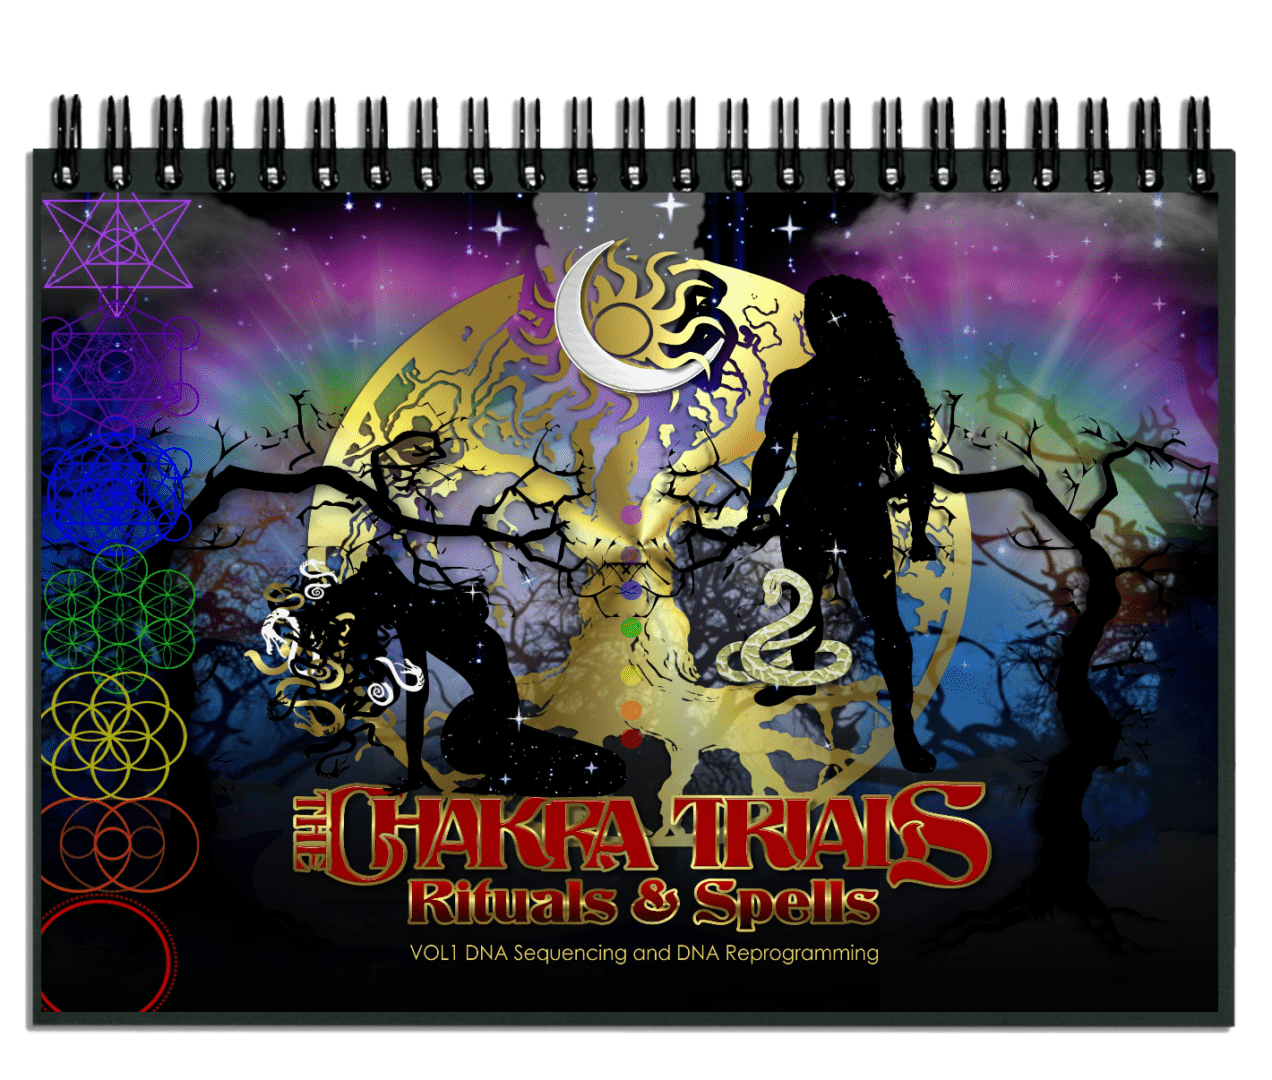 Illustration of a notebook cover featuring mystical symbols, silhouettes of a woman and a tree against a colorful cosmic background with the title "The Chakra Trials "Rituals & Spells" Vol1.